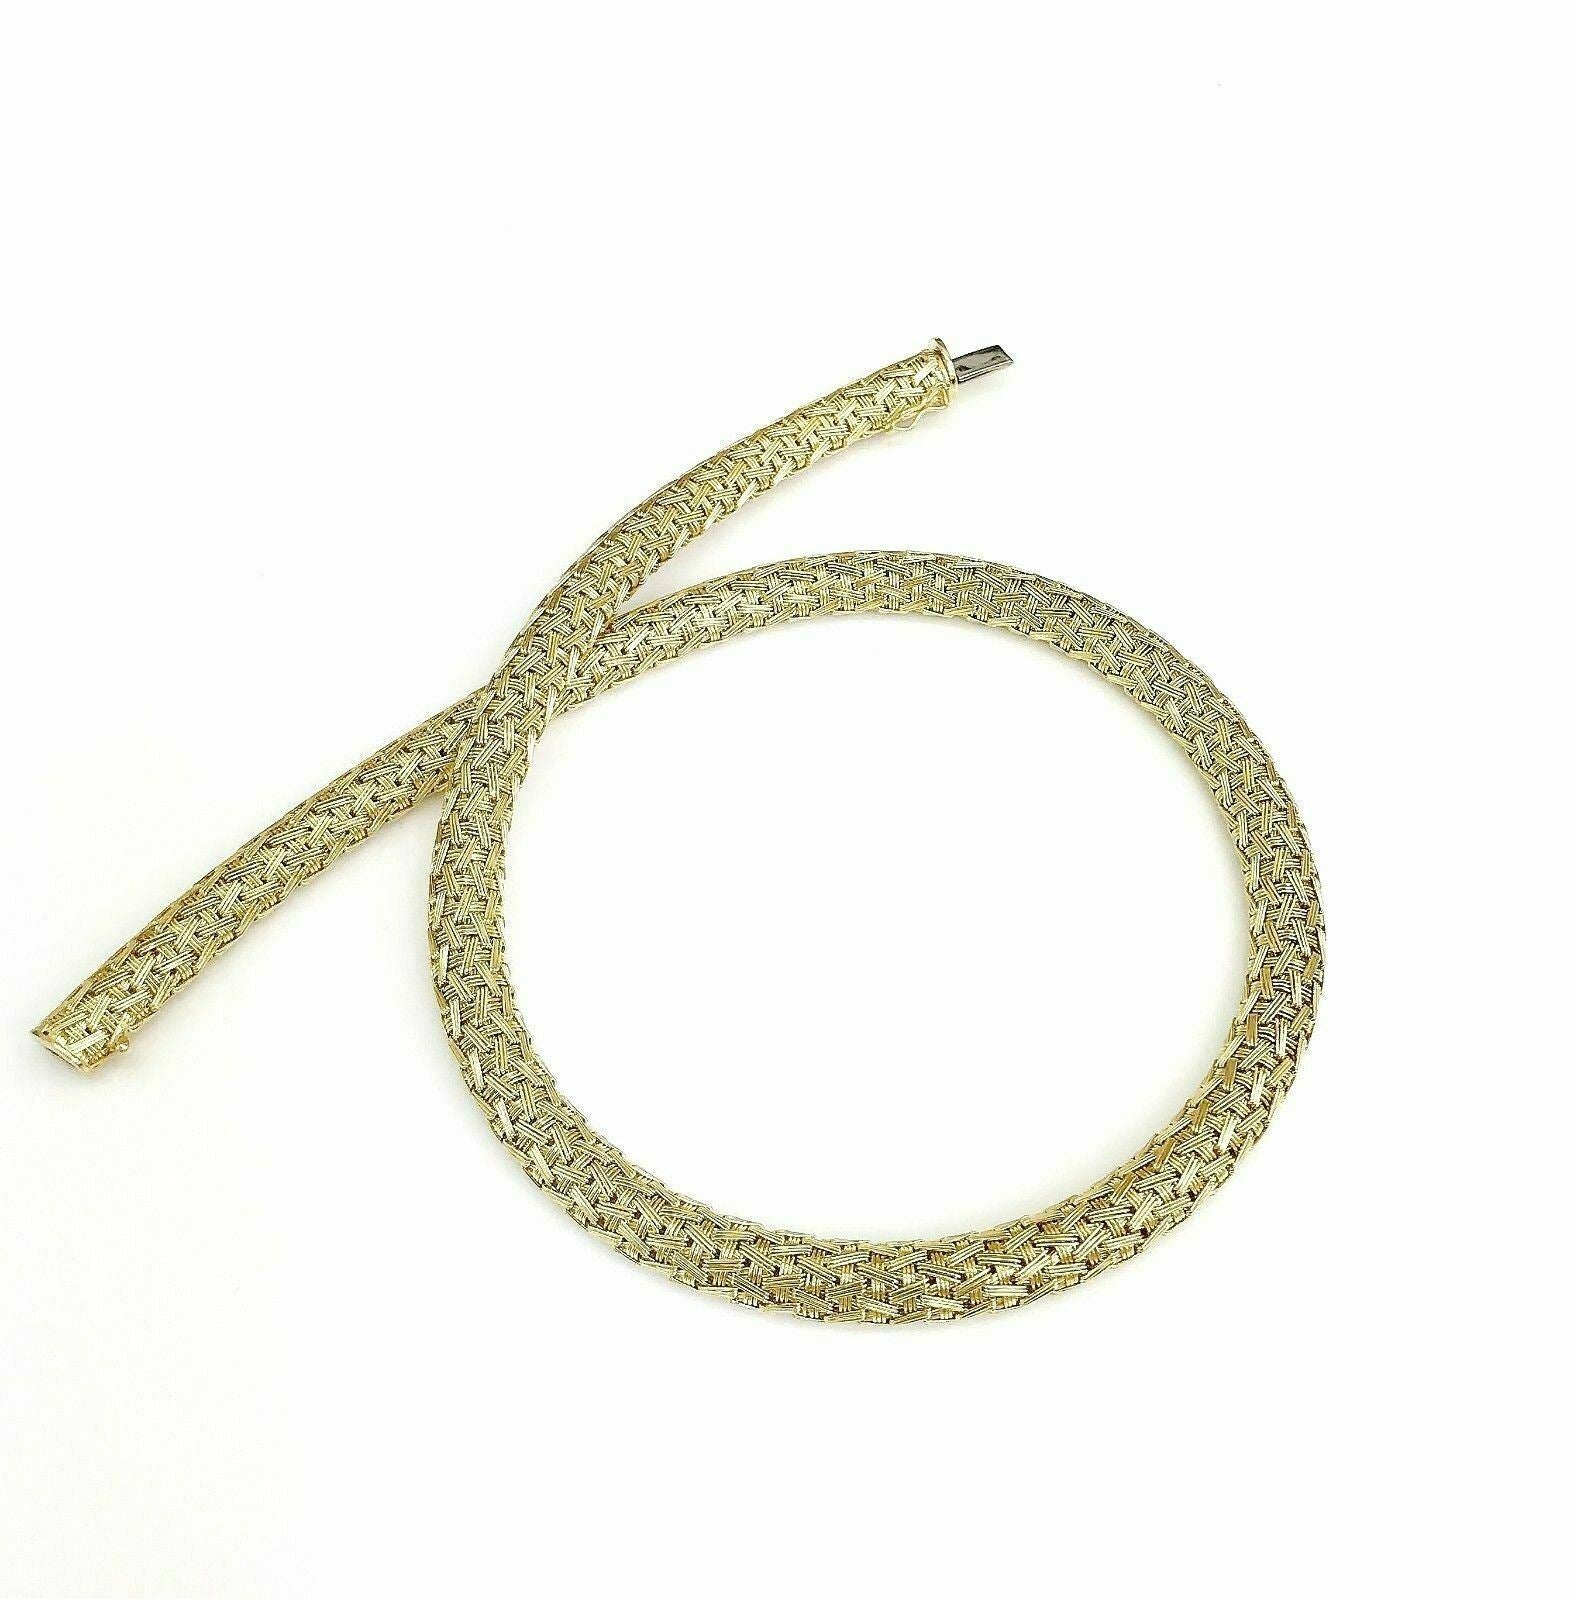 Solid 14K Yellow Gold Basketweave Necklace 16 Inch 2.01 Ounces 1/3 Inch Width